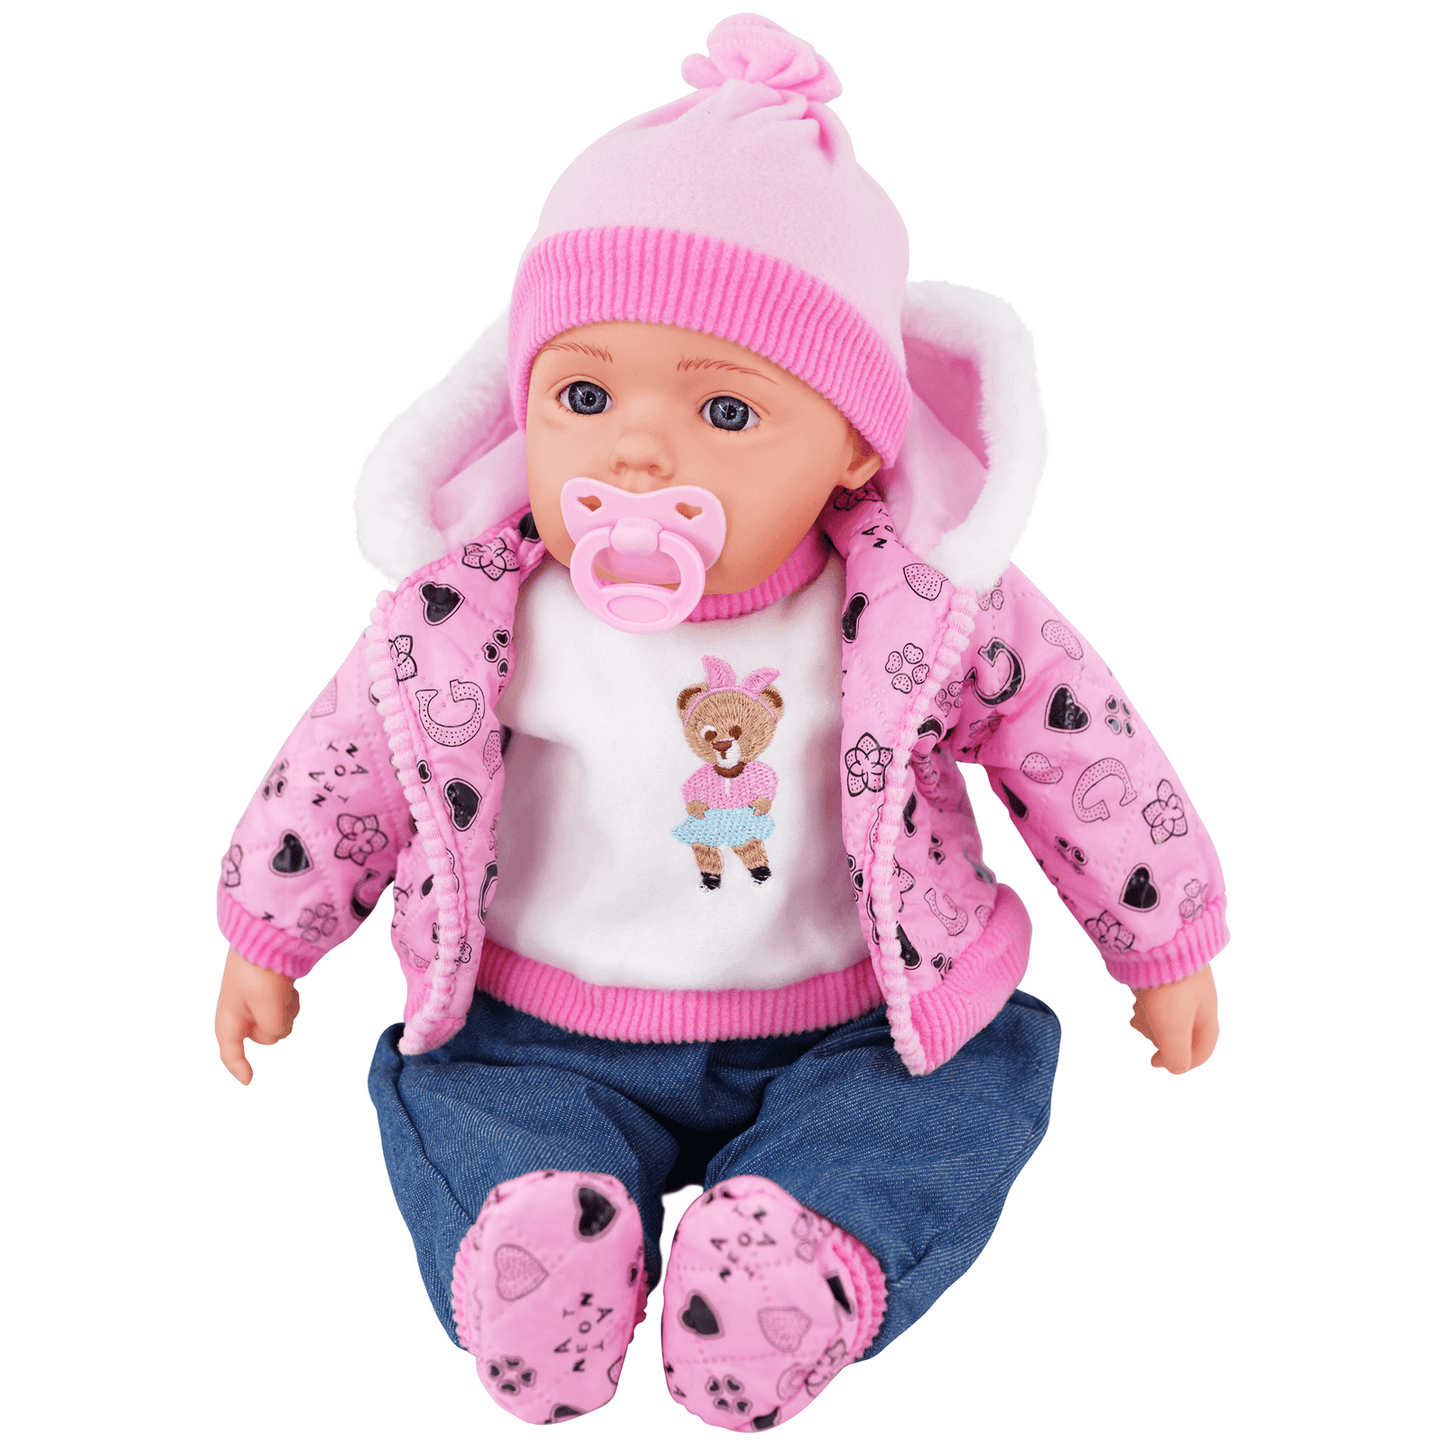 20" Real Touch Poseable New Born Baby Girl Pinky Pink Doll